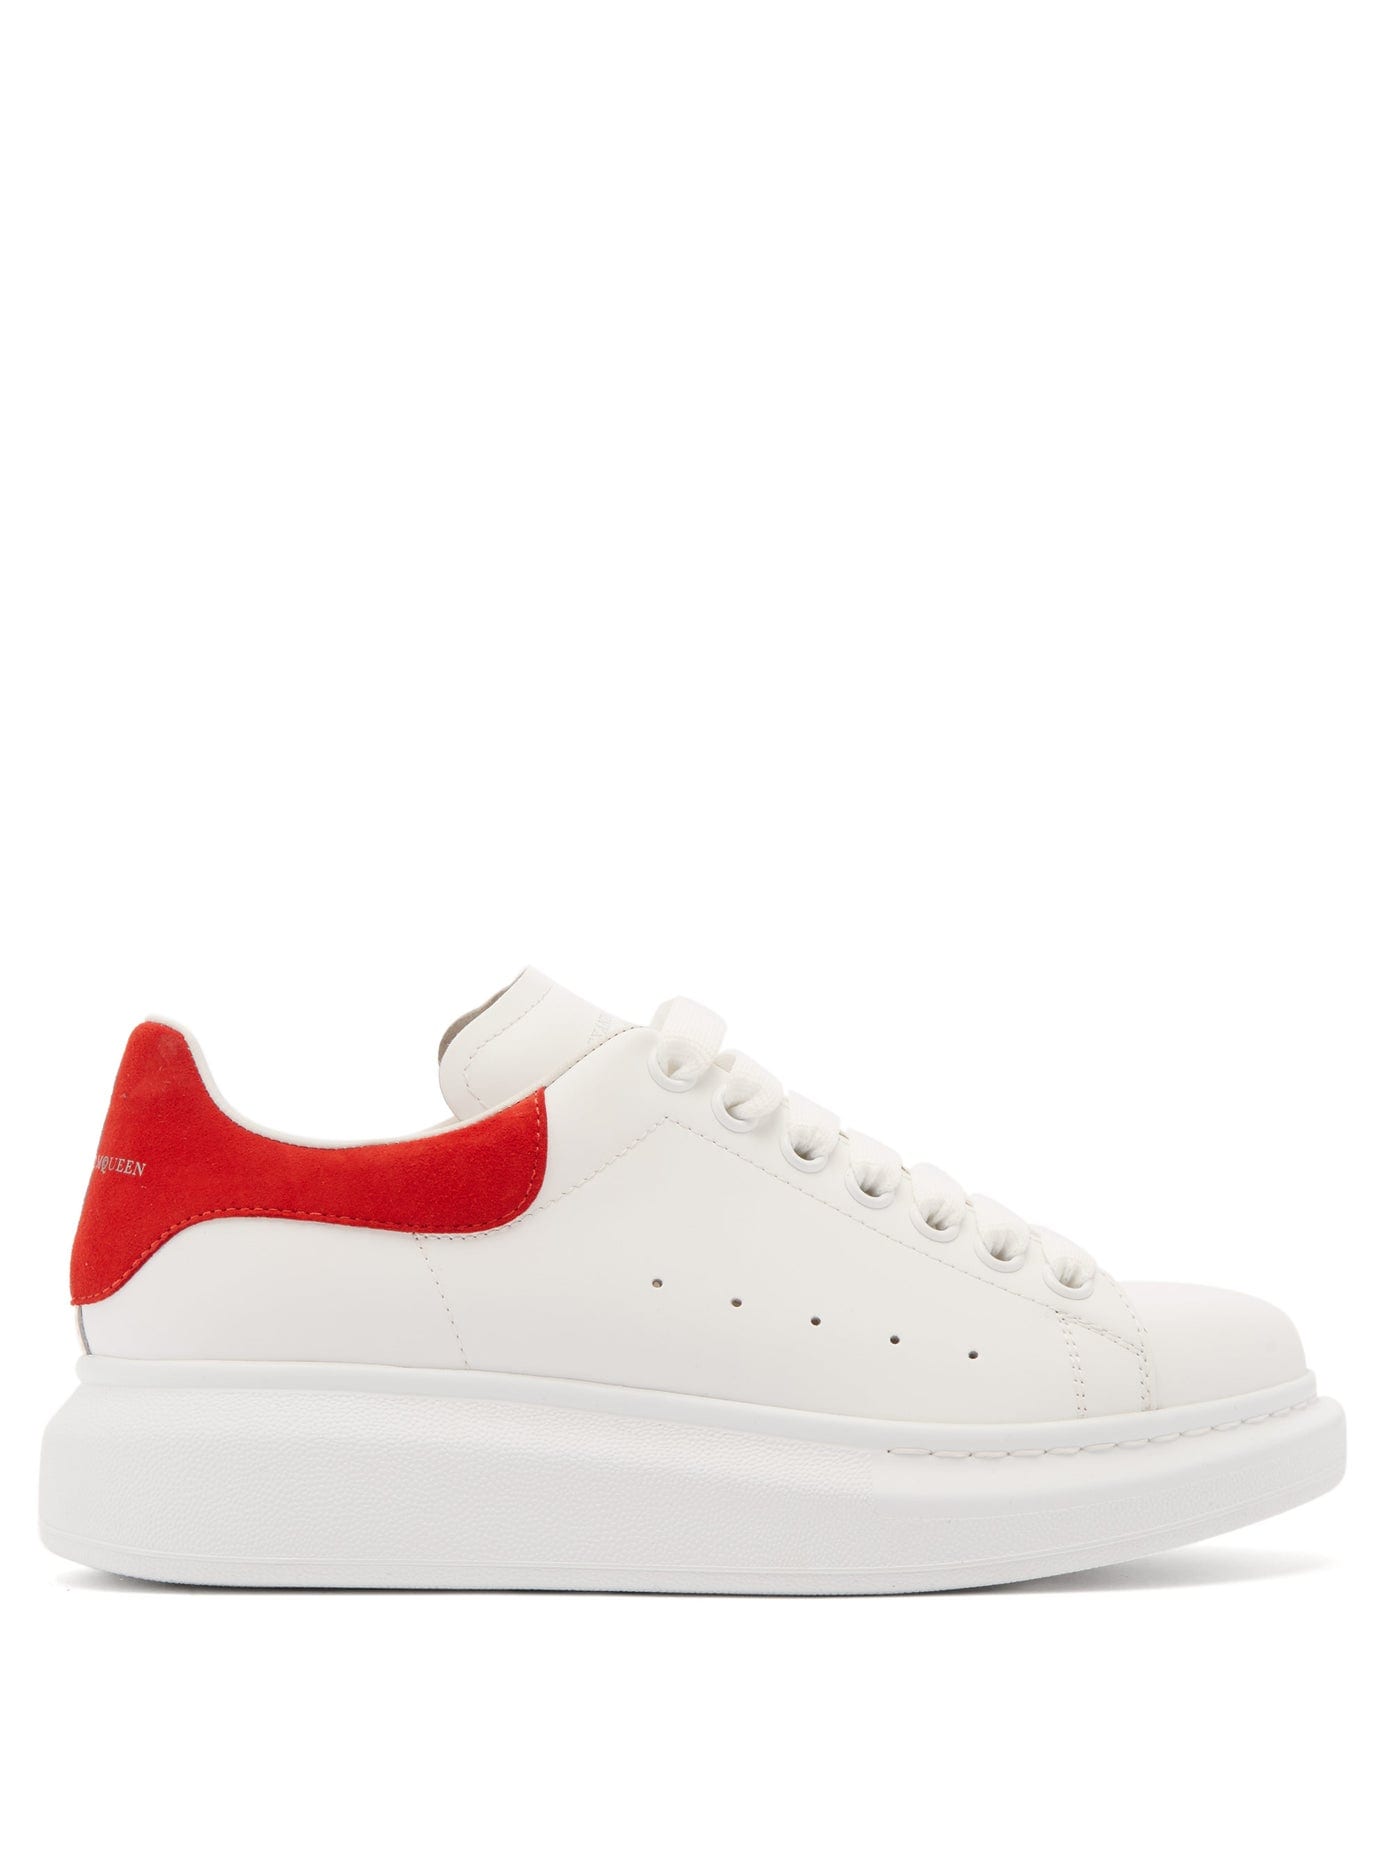 white leather platform sneakers with red heel tab